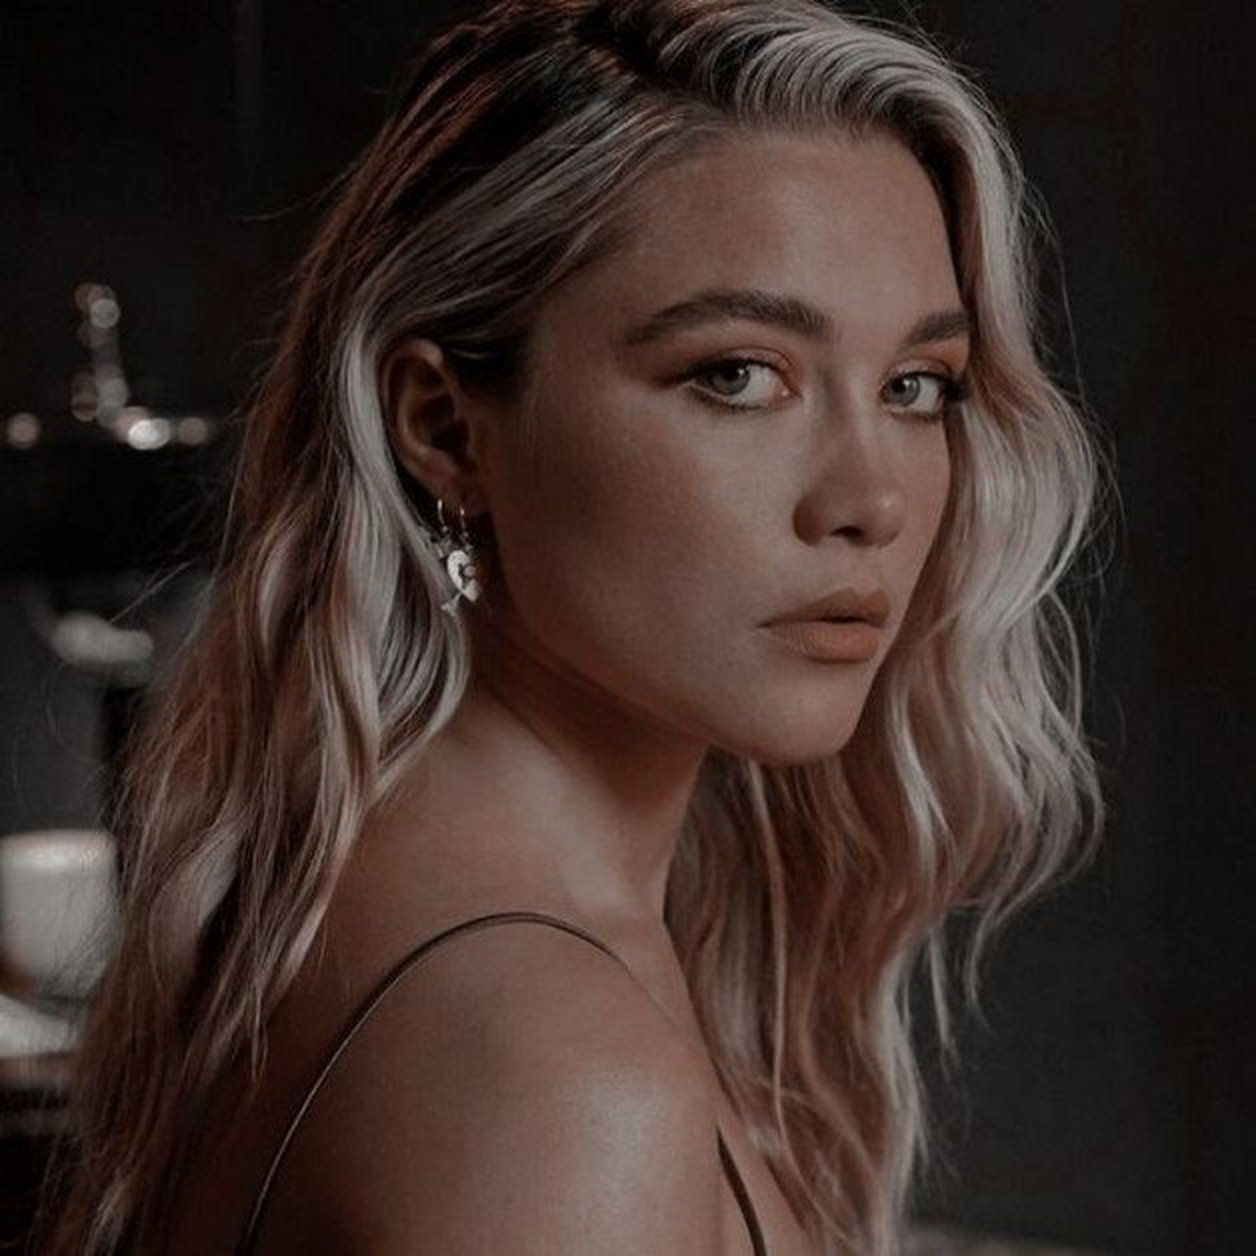 Photo by Ruinedcarpet with the username @Ruinedcarpet,  August 4, 2022 at 10:23 AM. The post is about the topic Actresses and the text says 'Florence Pugh.

#FlorencePugh #Cute #Actress #Hot #British #Blonde #Pretty #Babe #Gorgeous #Beauty #Cutie #Model #GfMaterial #Hottie #Actor #BritishGirl #Possing #Photoshoot #Modeling #Cuteness #Photography'